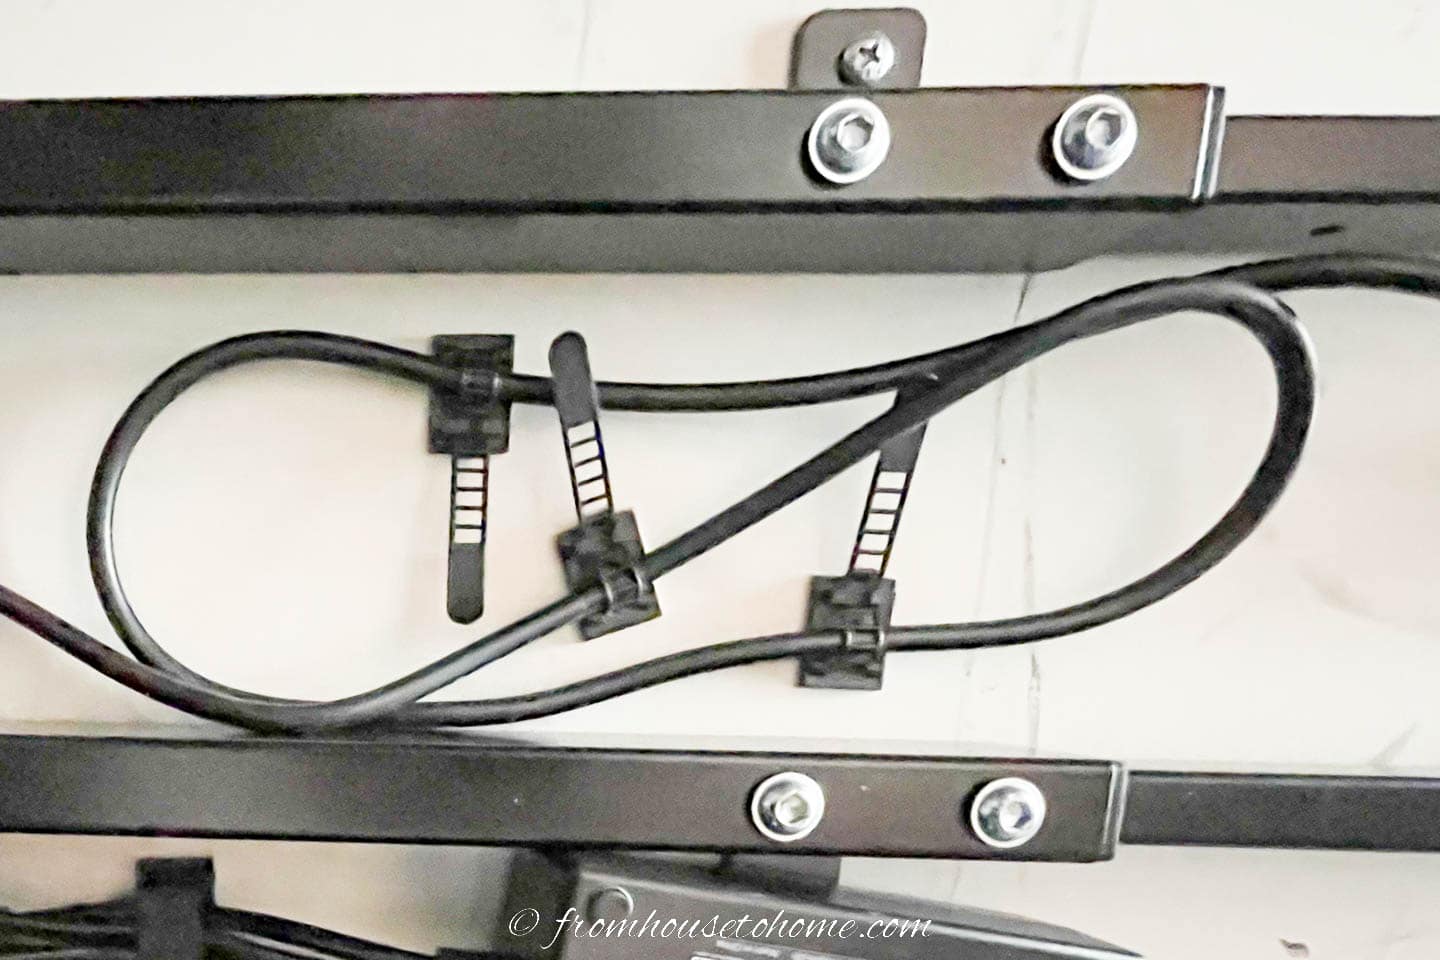 Individual cable ties holding a cord up underneath a desk